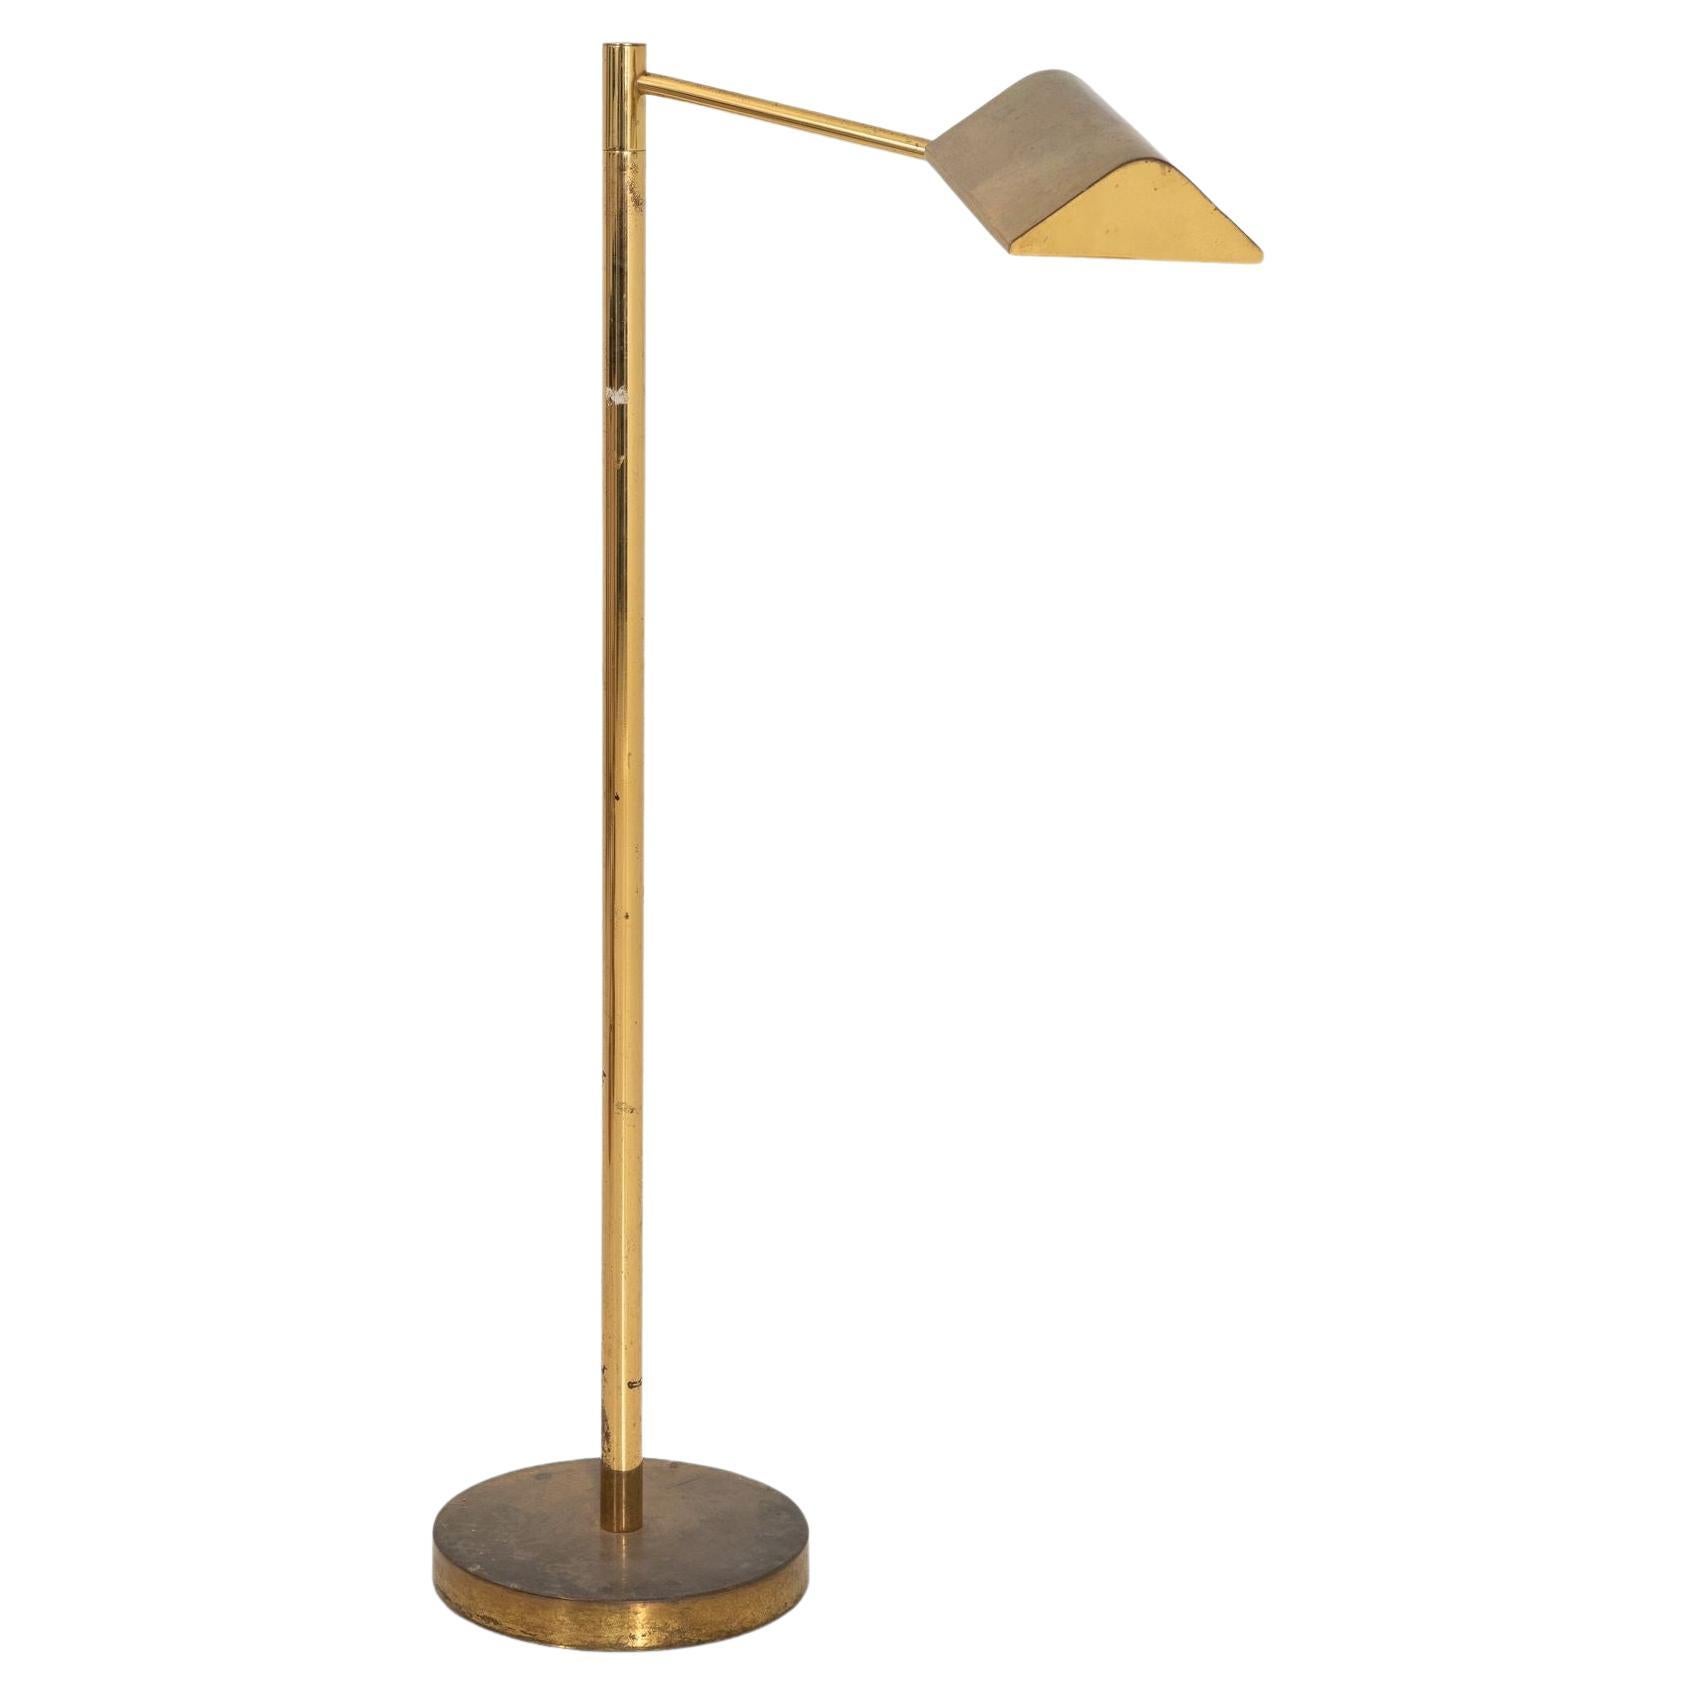 Vintage Brass Floor Lamp, France mid 20th Century For Sale